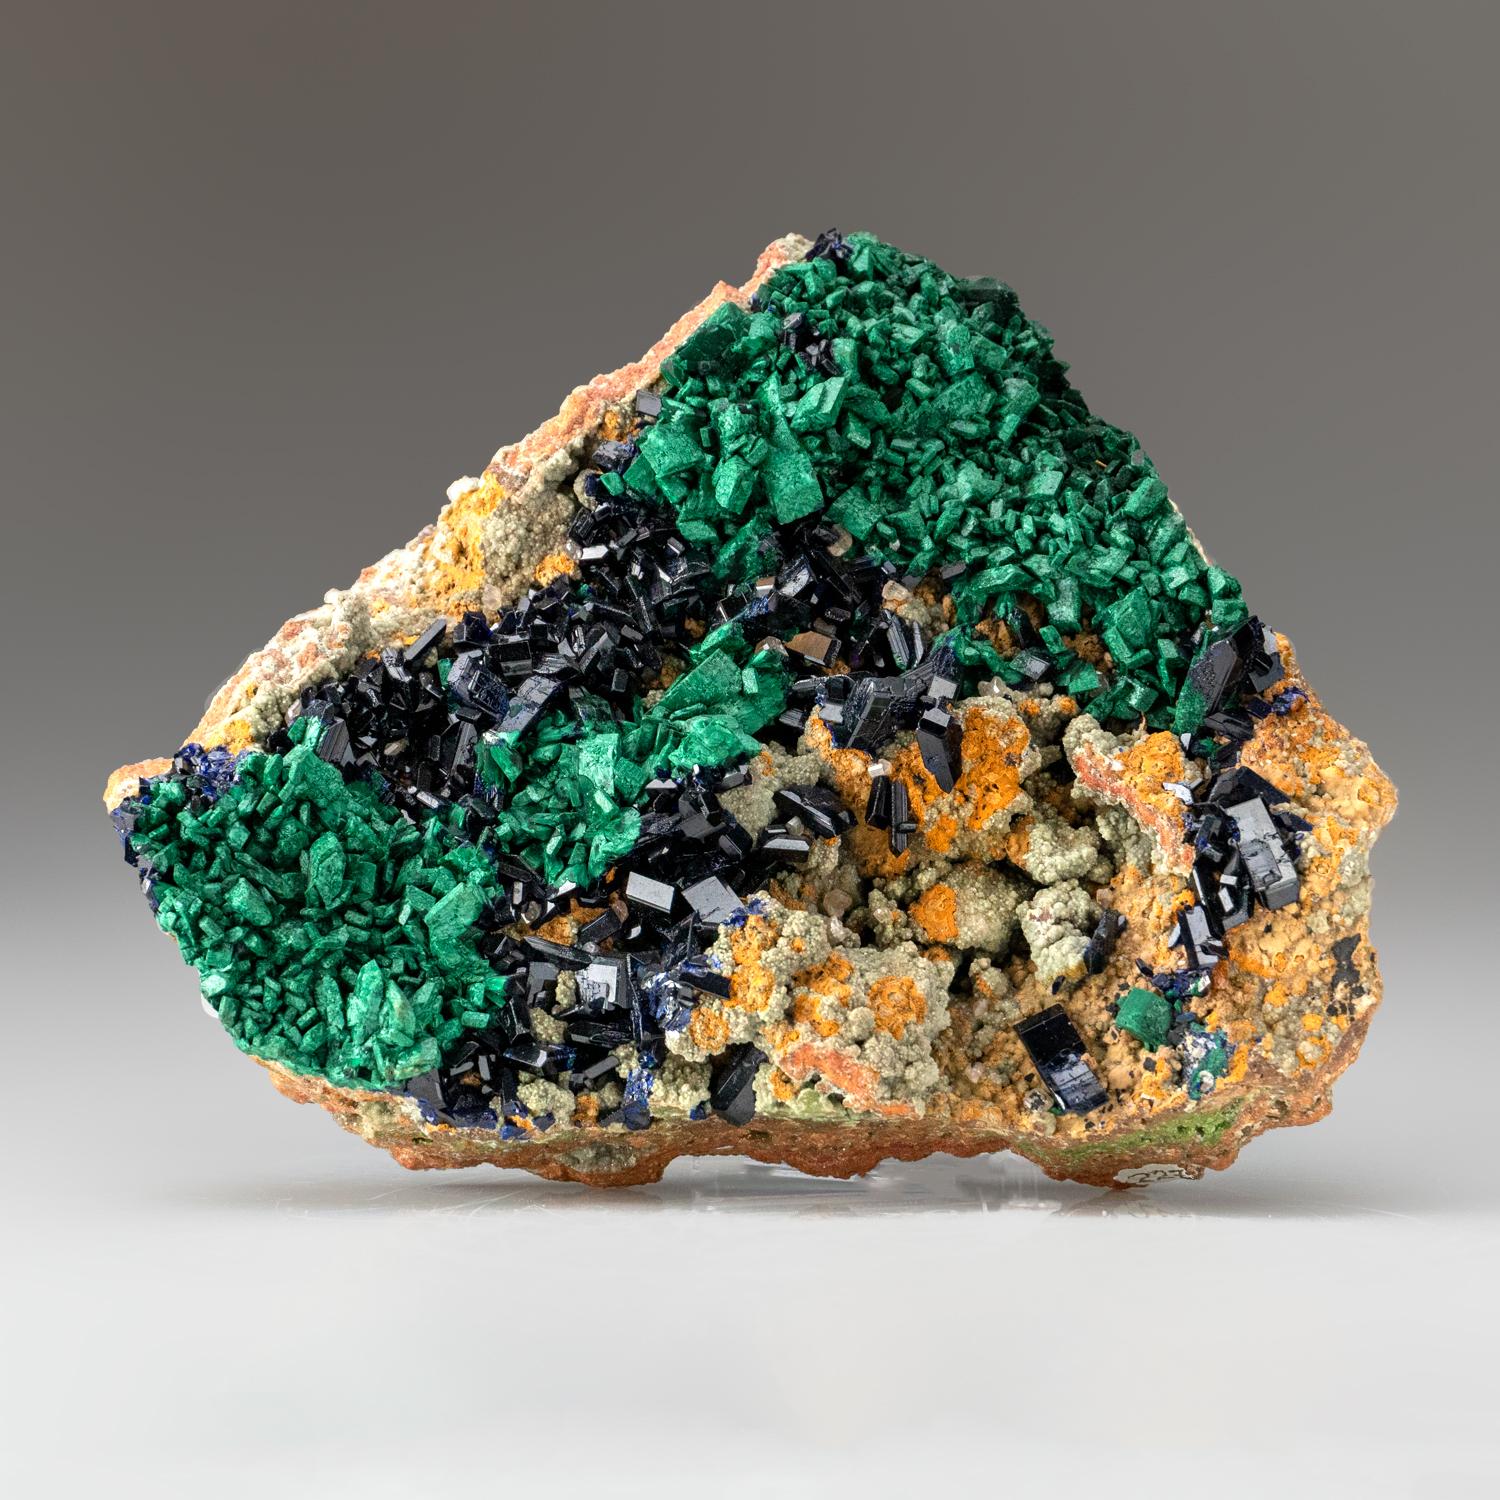 World class specimen of lustrous royal blue azurite crystals with sharp bladed terminations . There are several isolated areas exhibiting fibrous malachite psuedomorph after azurite.

This specimen was once part of the Joseph Freilich collection,